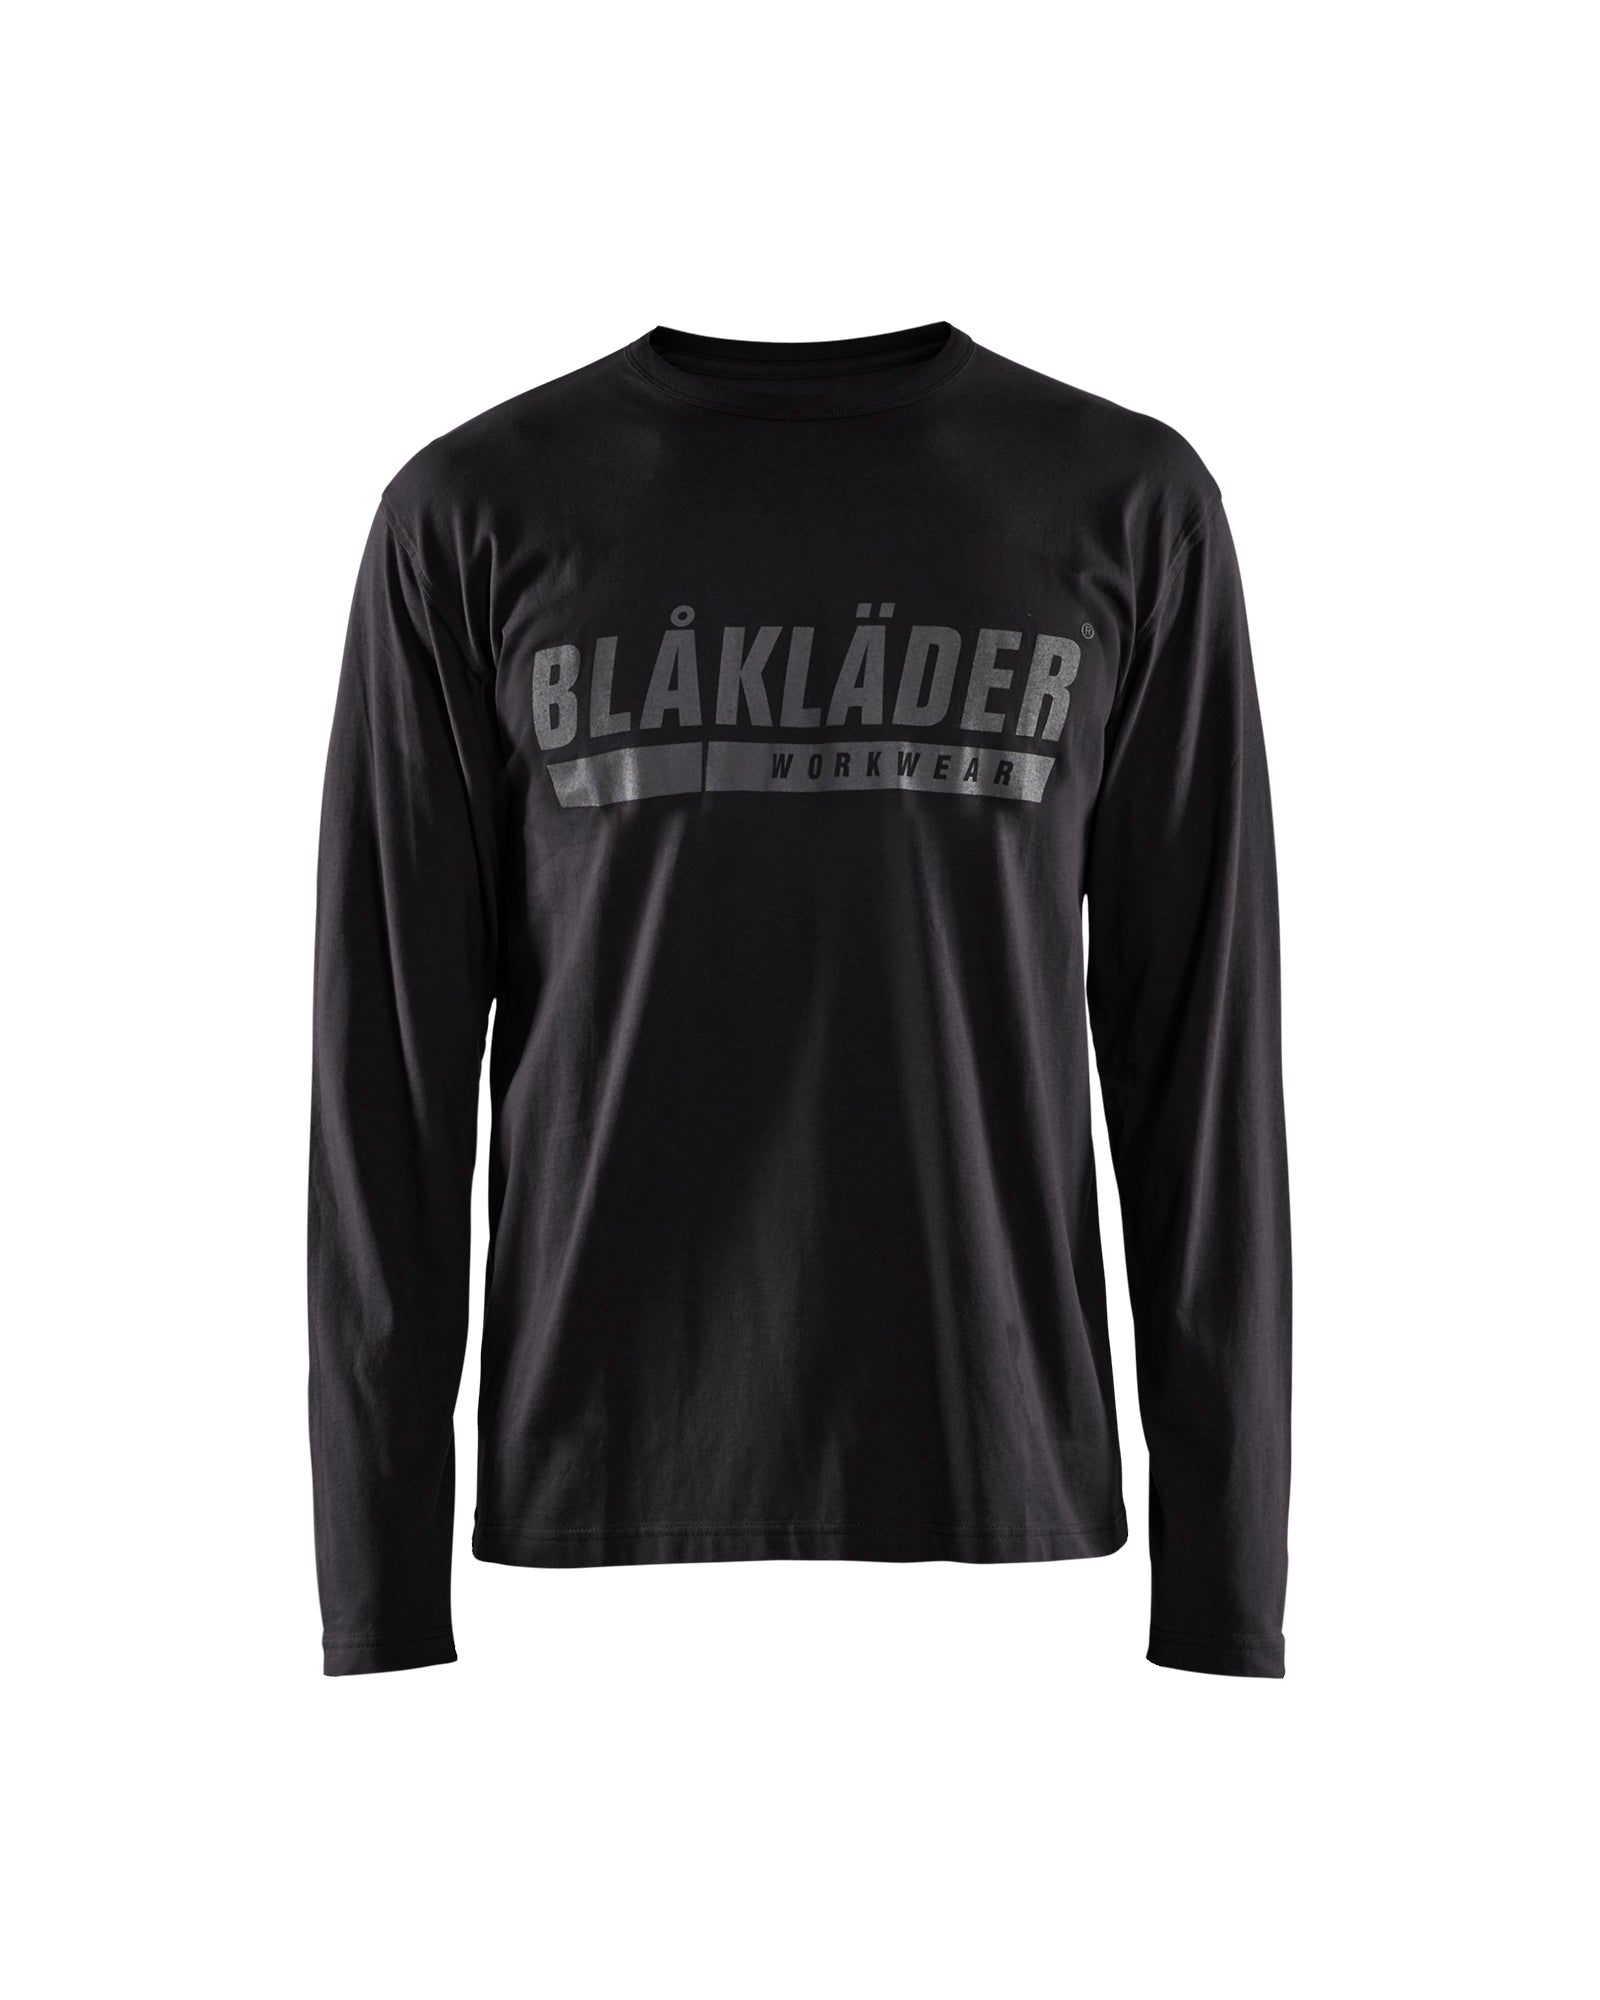 Men's Blaklader US Long Sleeves with Print T-Shirt in Black from the front view